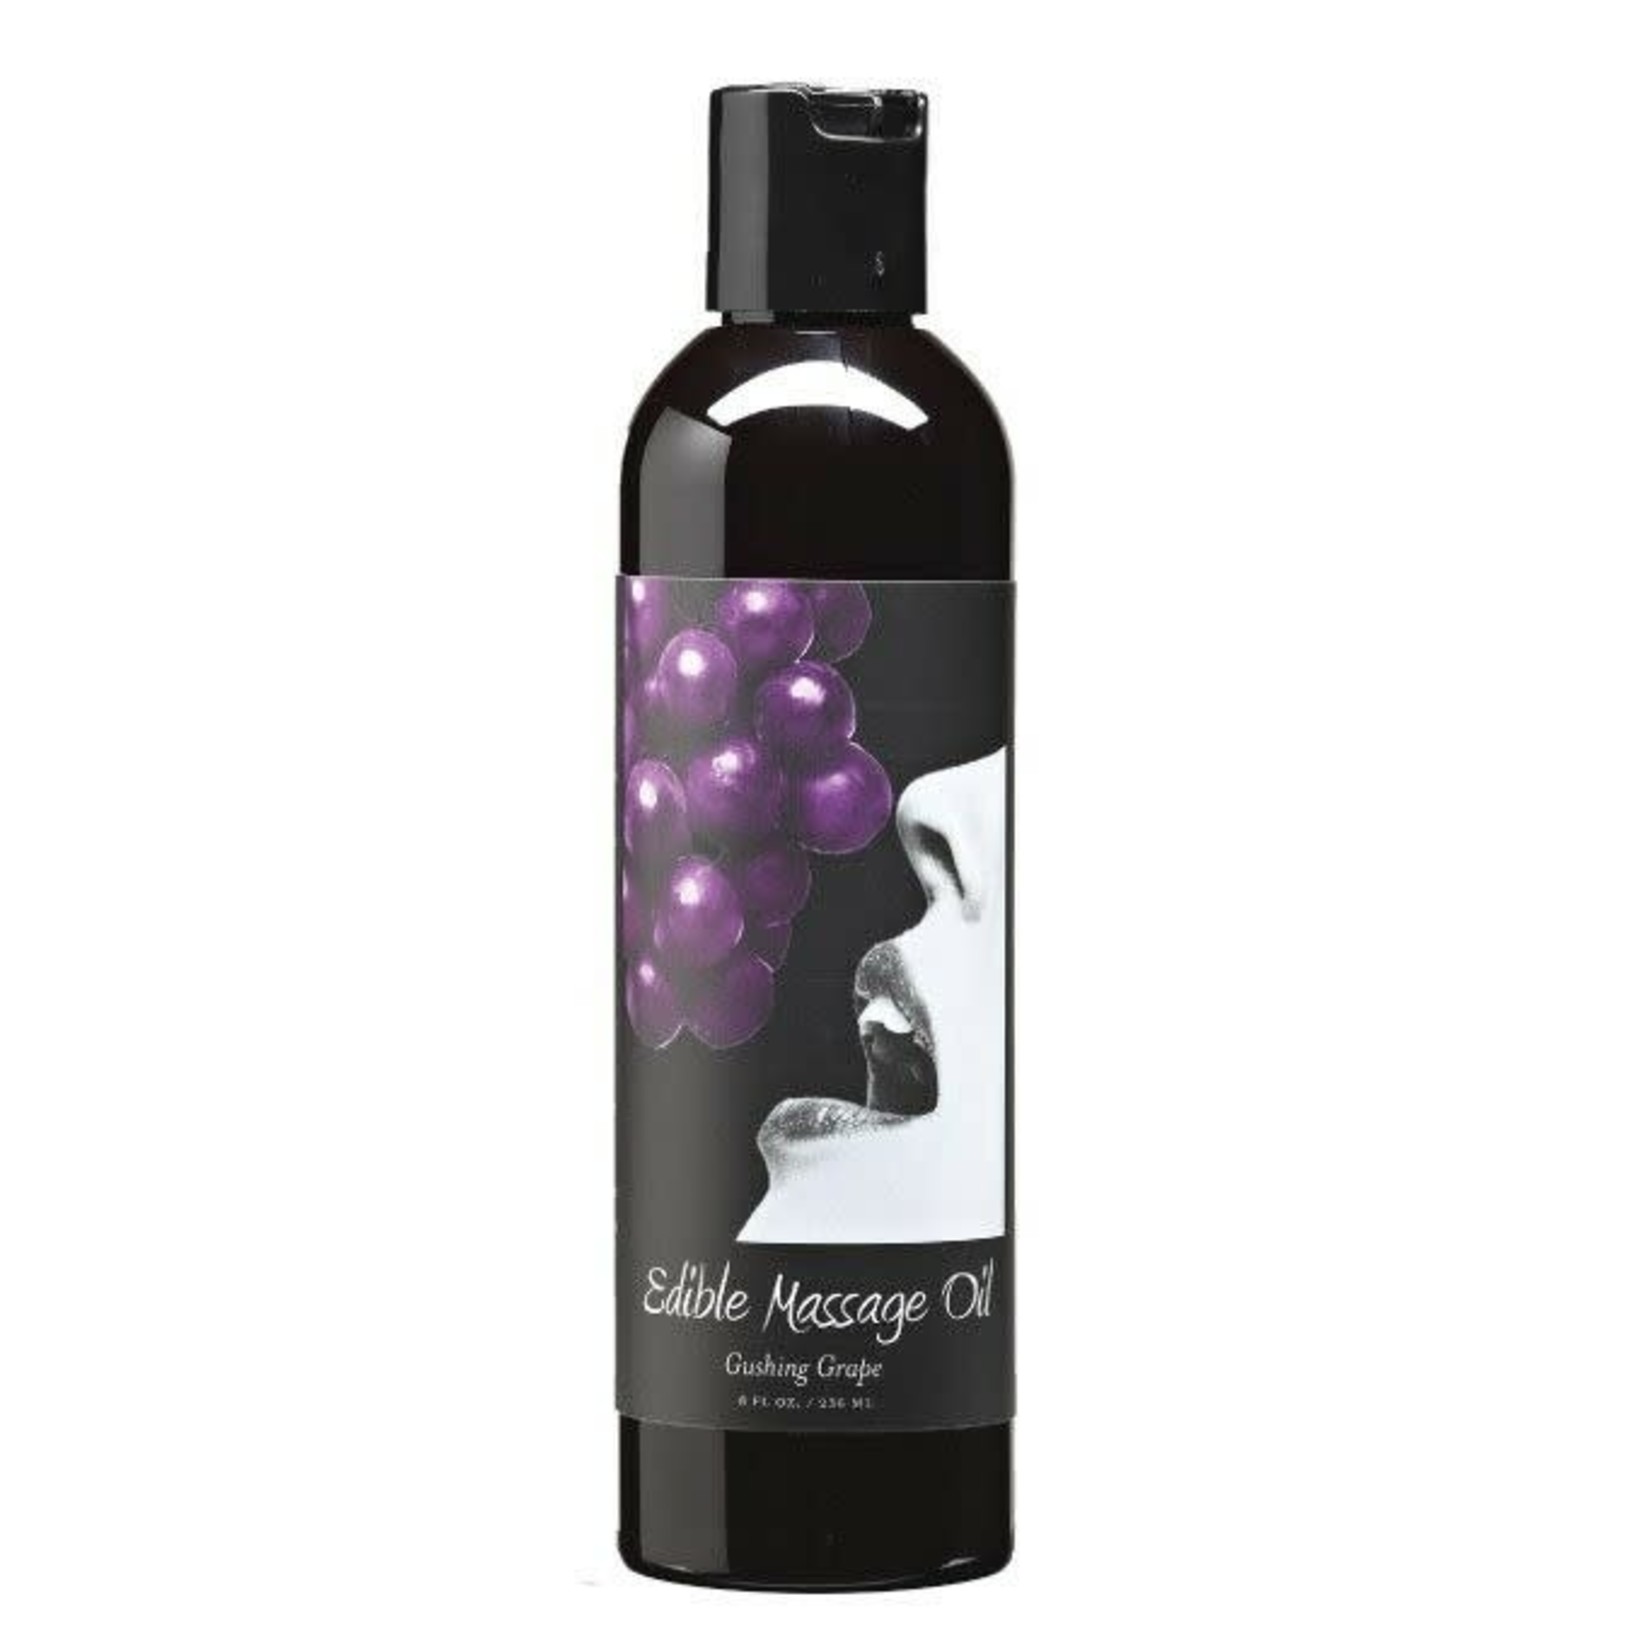 EARTHLY BODY EARTHLY BODIES - EDIBLE MASSAGE OIL - GRAPE 8oz